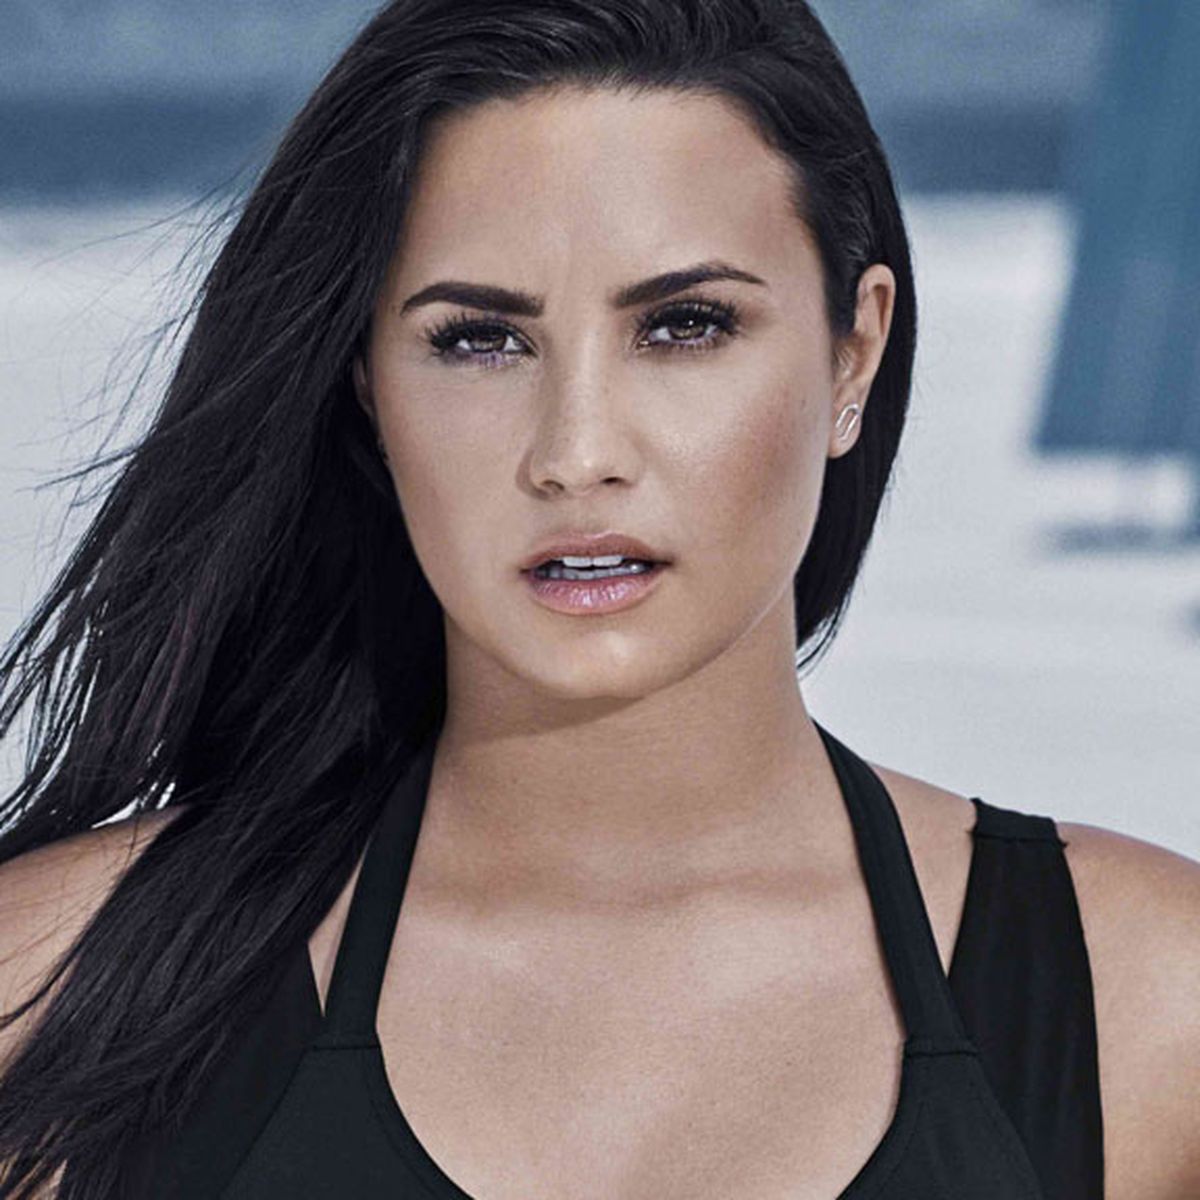 Fabletics to launch first-ever collaboration with Demi Lovato